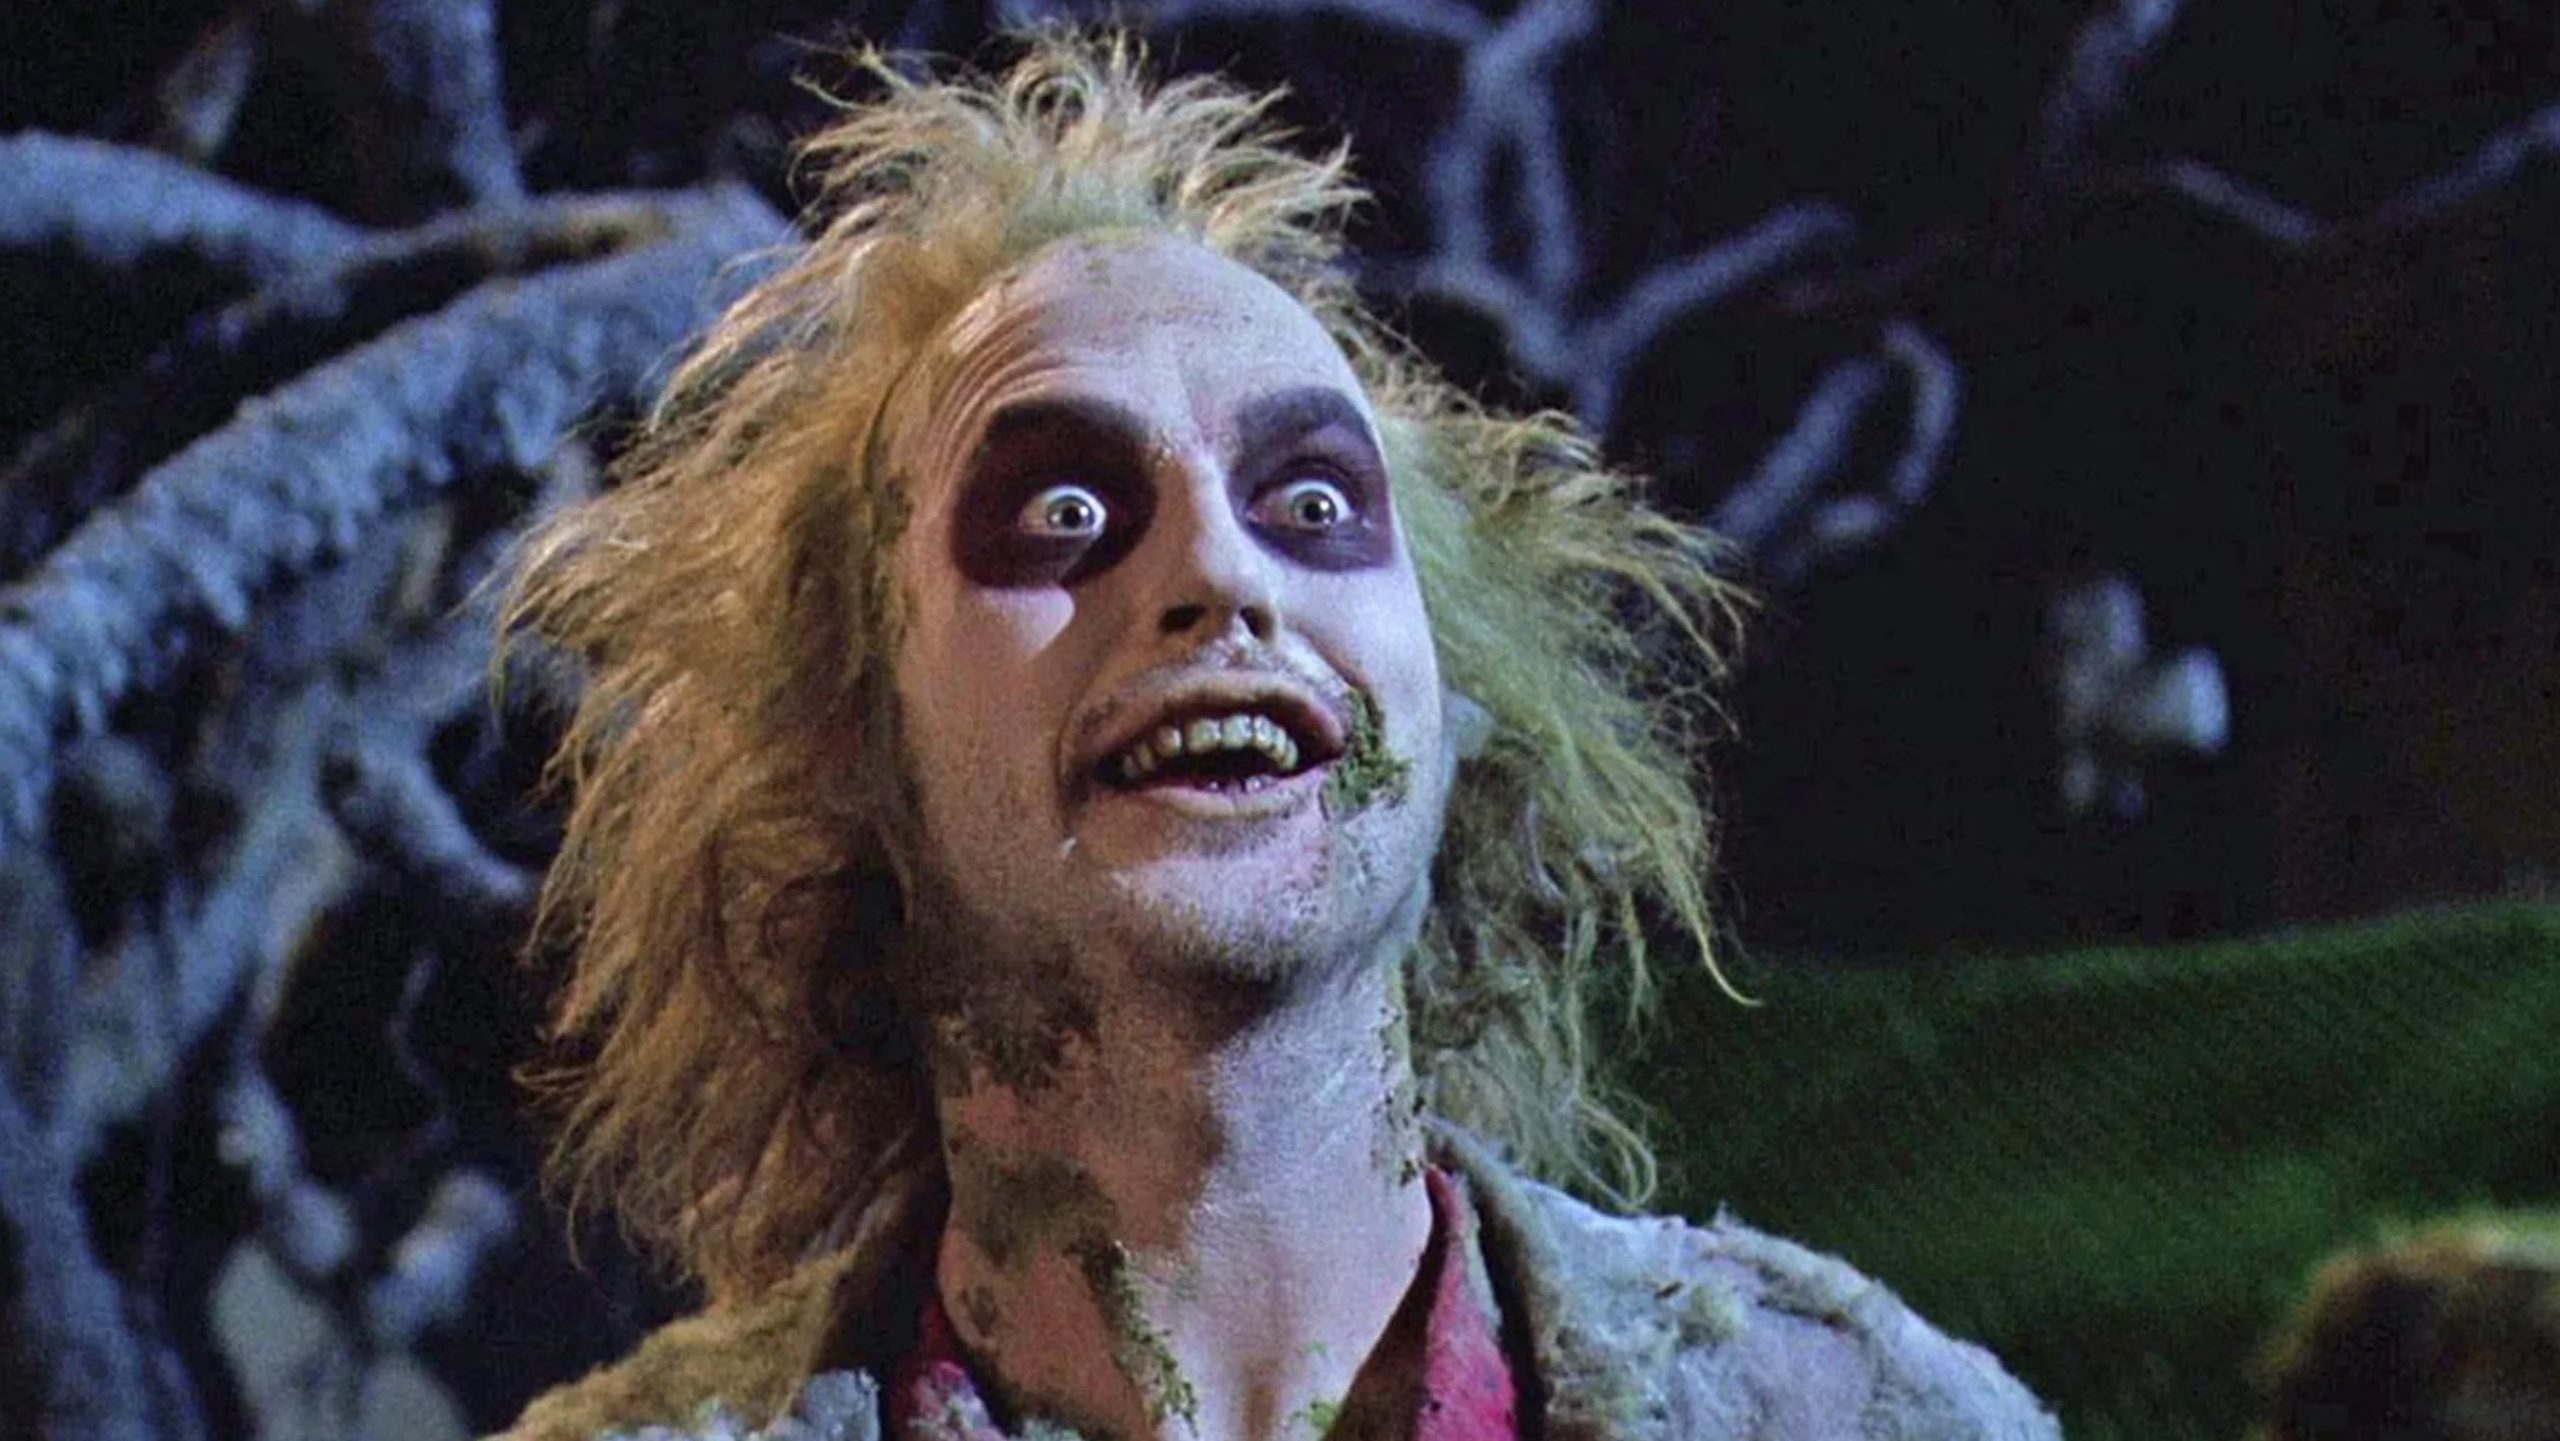 Beetlejuice Is An Insane Movie And It’s Insane It Ever Got Made